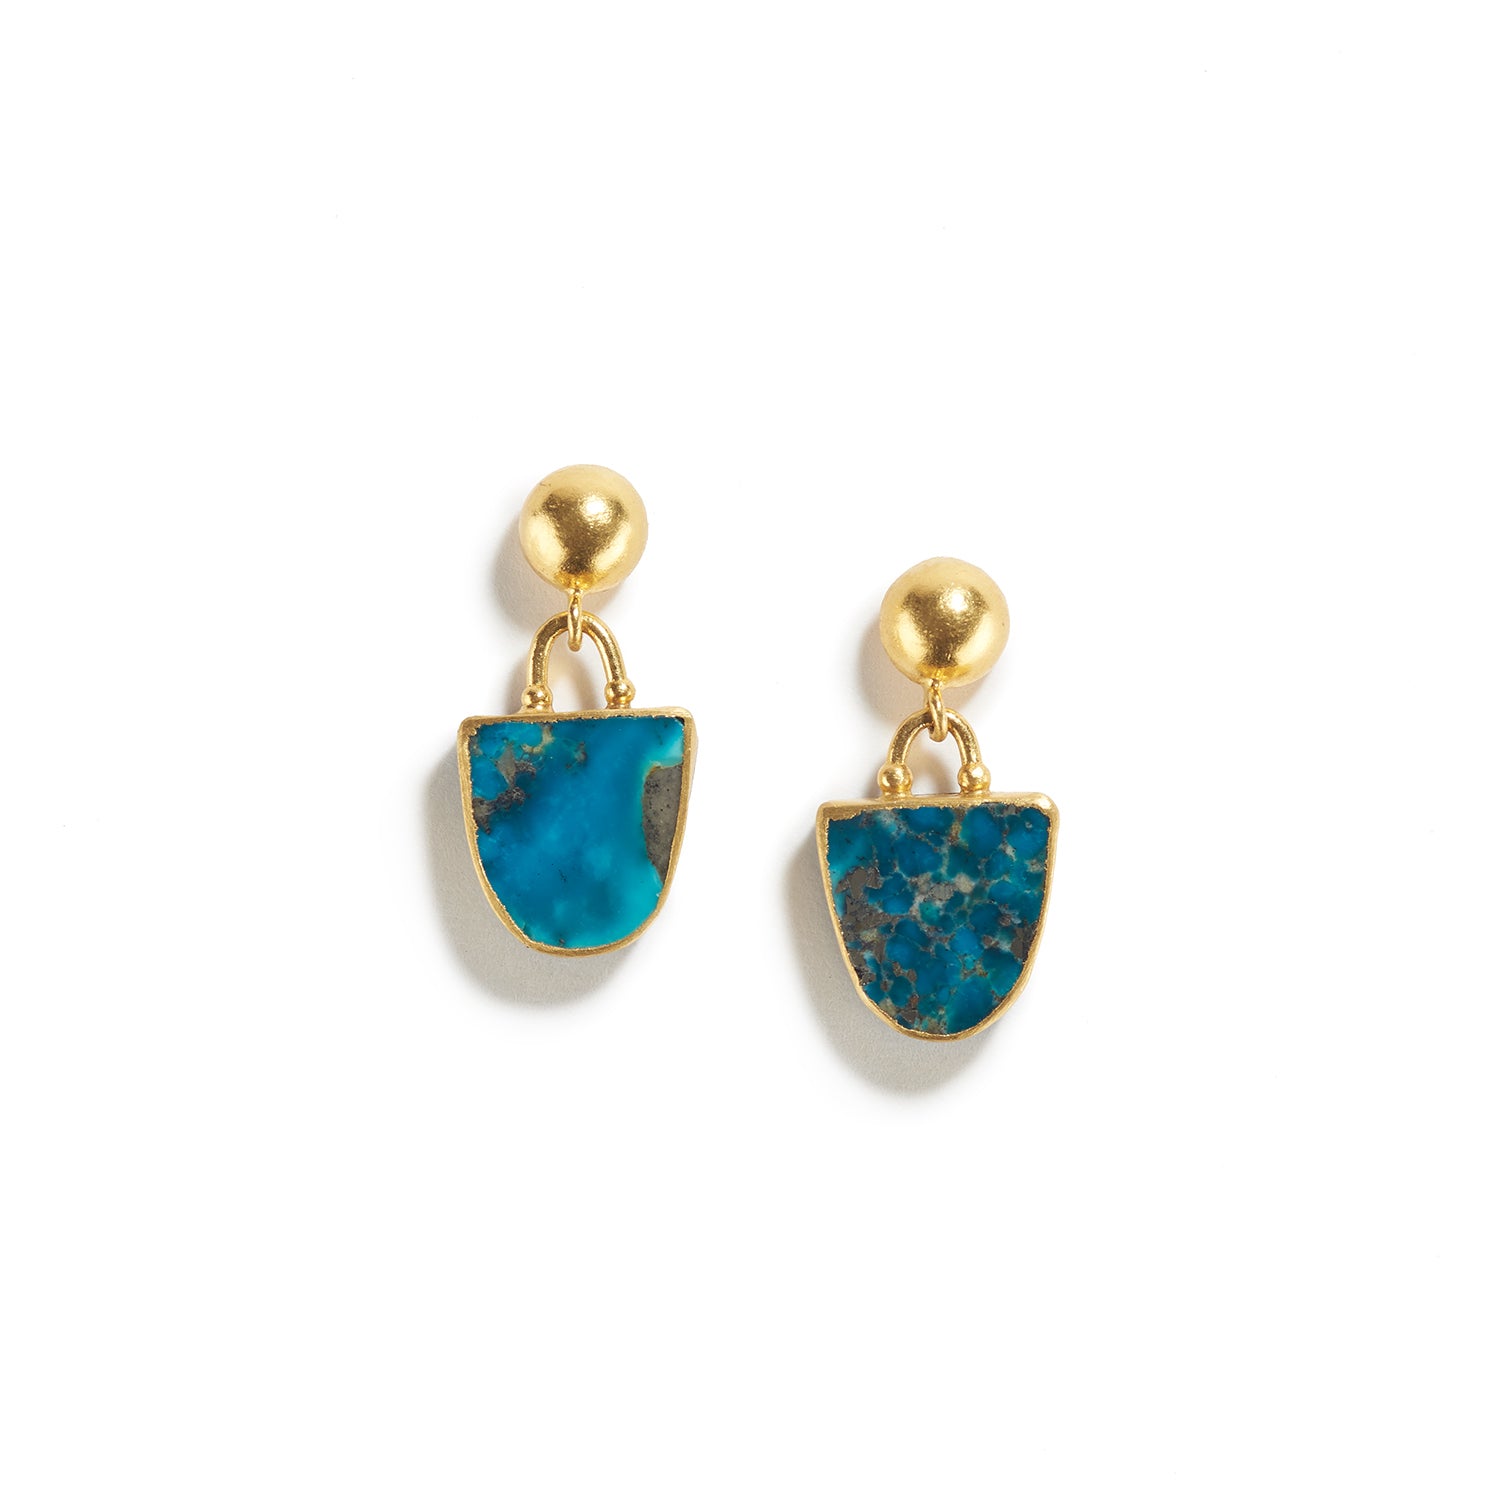 Turquoise Earrings with Gold and Silver